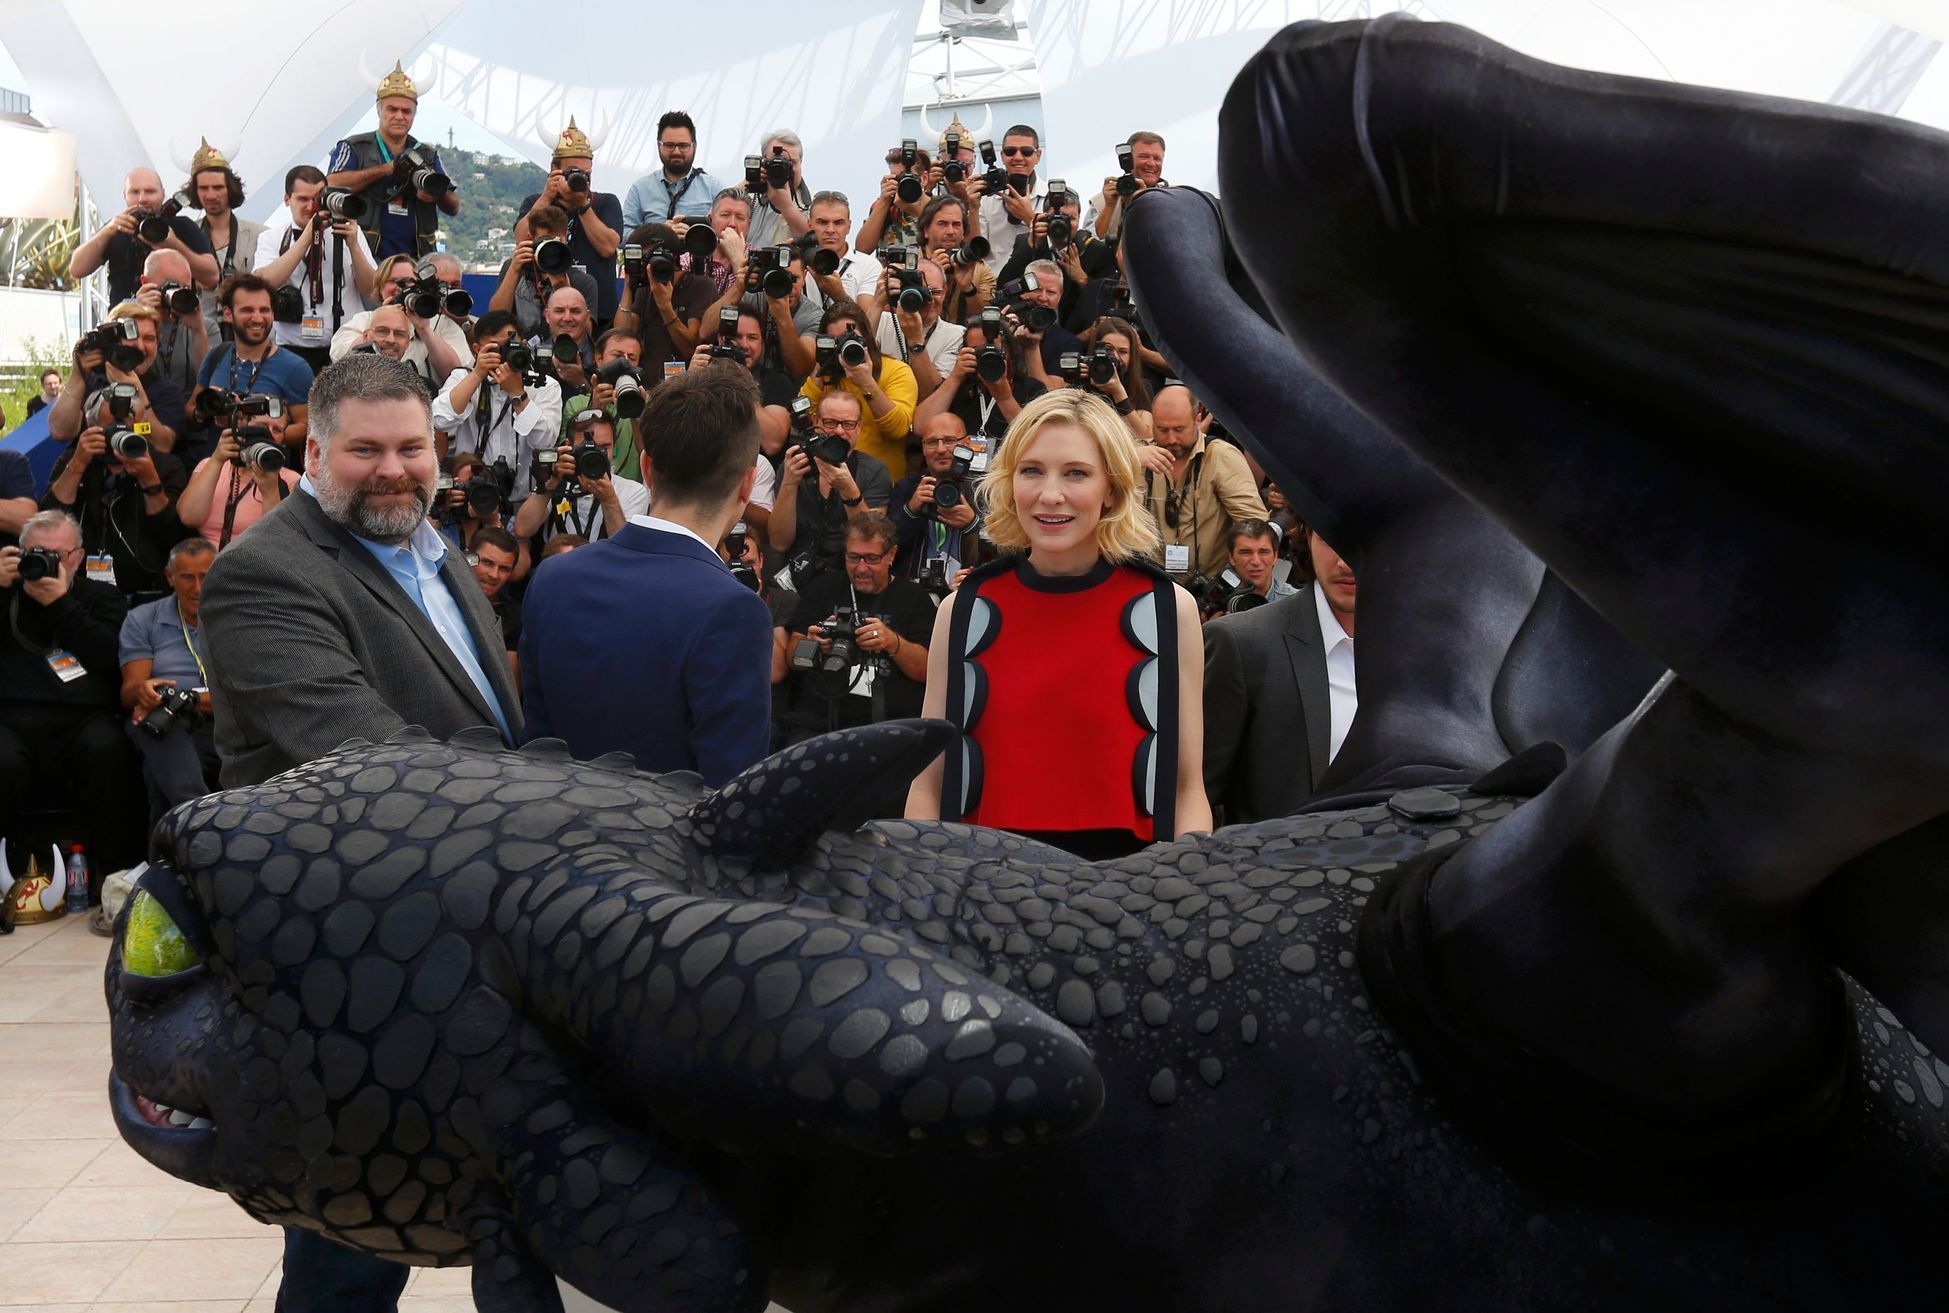 Director Dean DeBlois, cast members Jay Baruchel and Cate Blanchett pose during the photocall for the film &quot;How to Train Your Dragon 2&quot; out of competition at the 67th Cannes Film Festival in